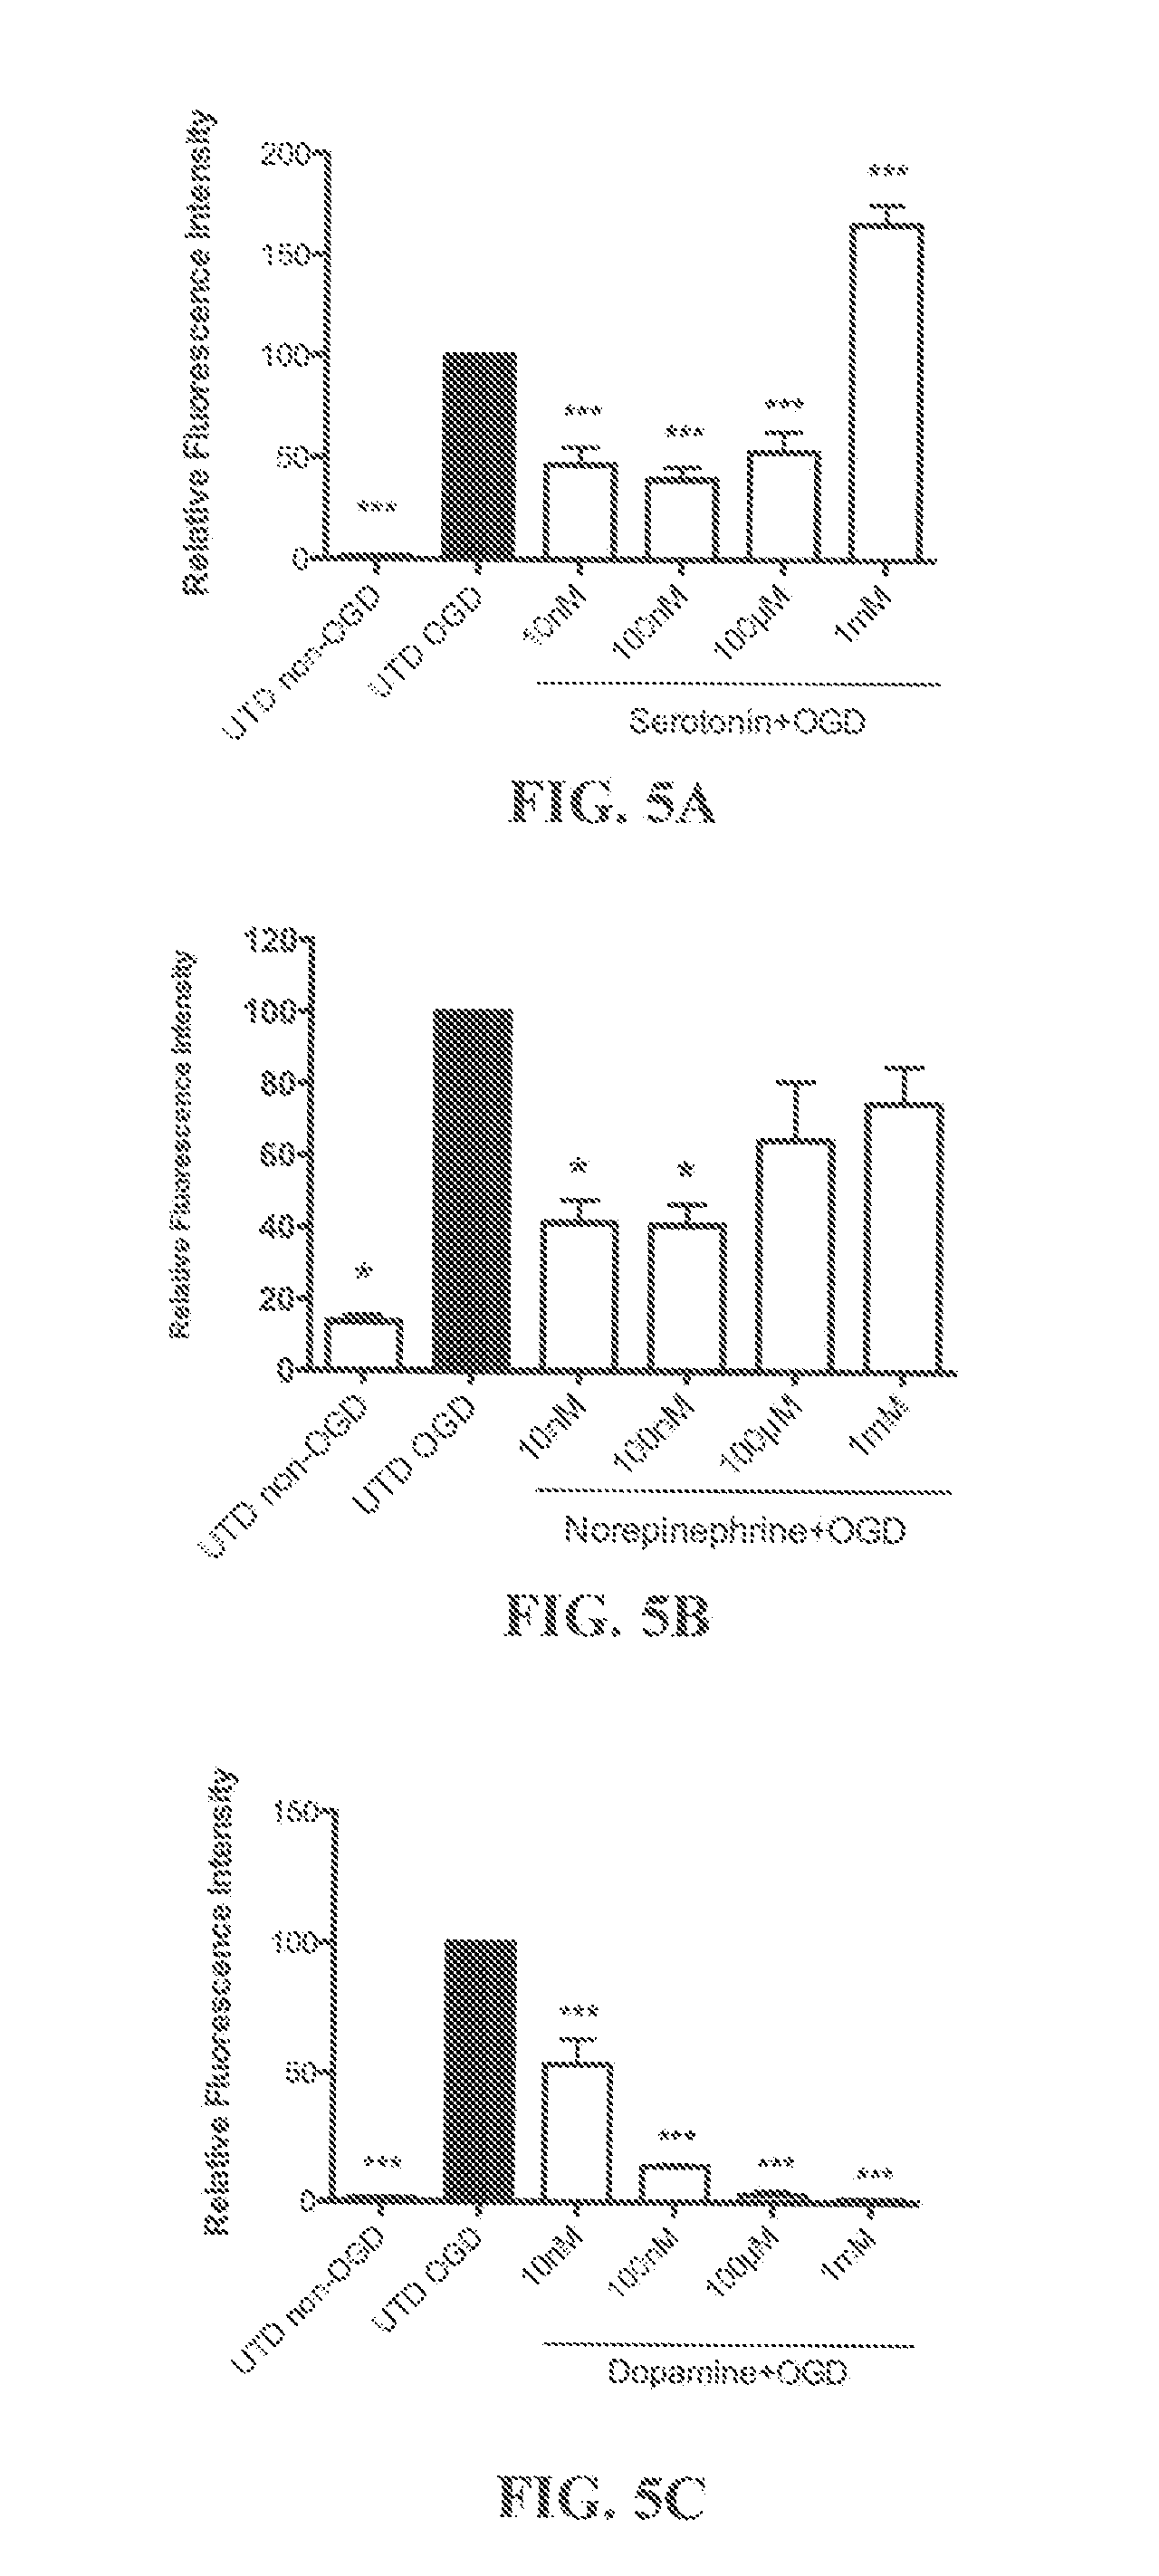 Method of reducing brain cell damage, inflammation or death